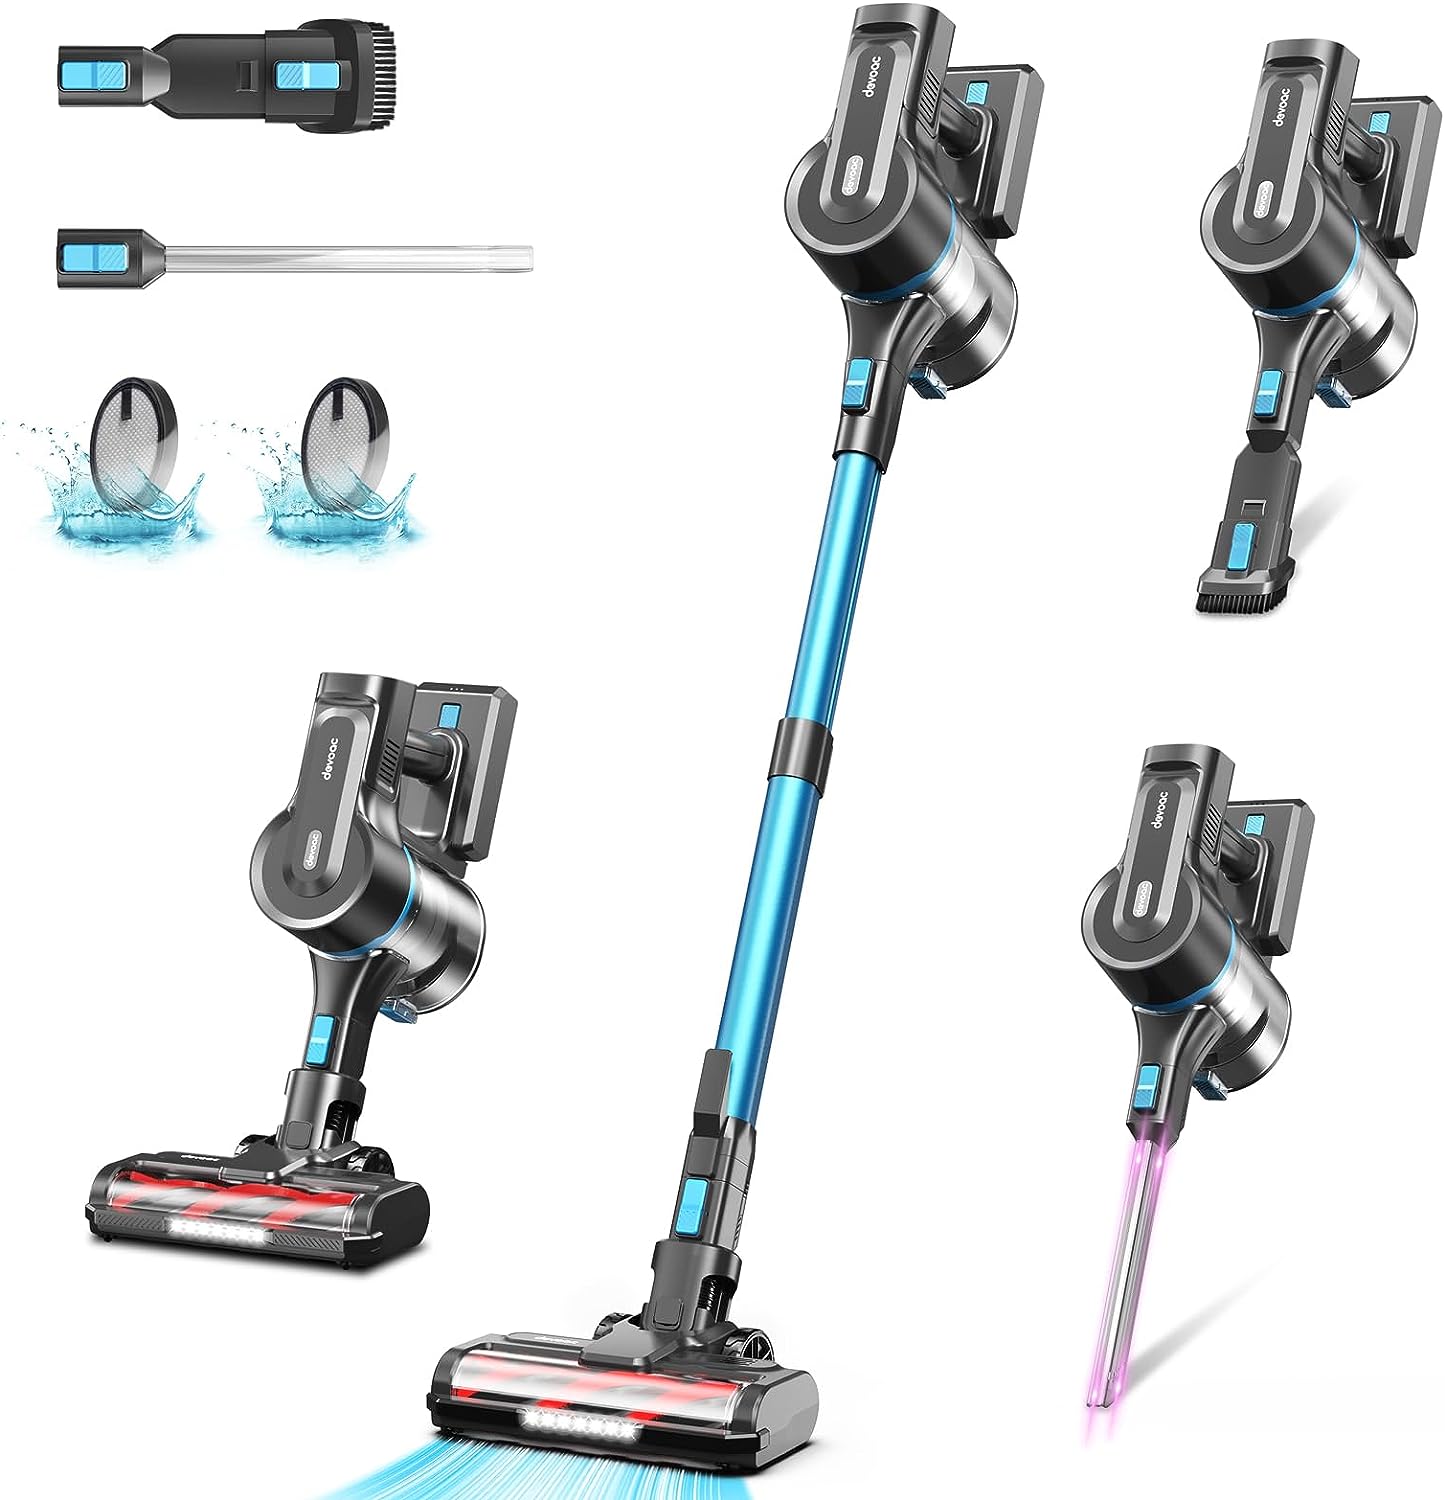  DEVOAC Cordless Vacuum Cleaner, Lightweight with Rechargeable  Battery, Convenient 6 in 1 Handheld Stick Vacuum Cleaner with Powerful  Suction for Carpet Hard Floor Pet Hair Home